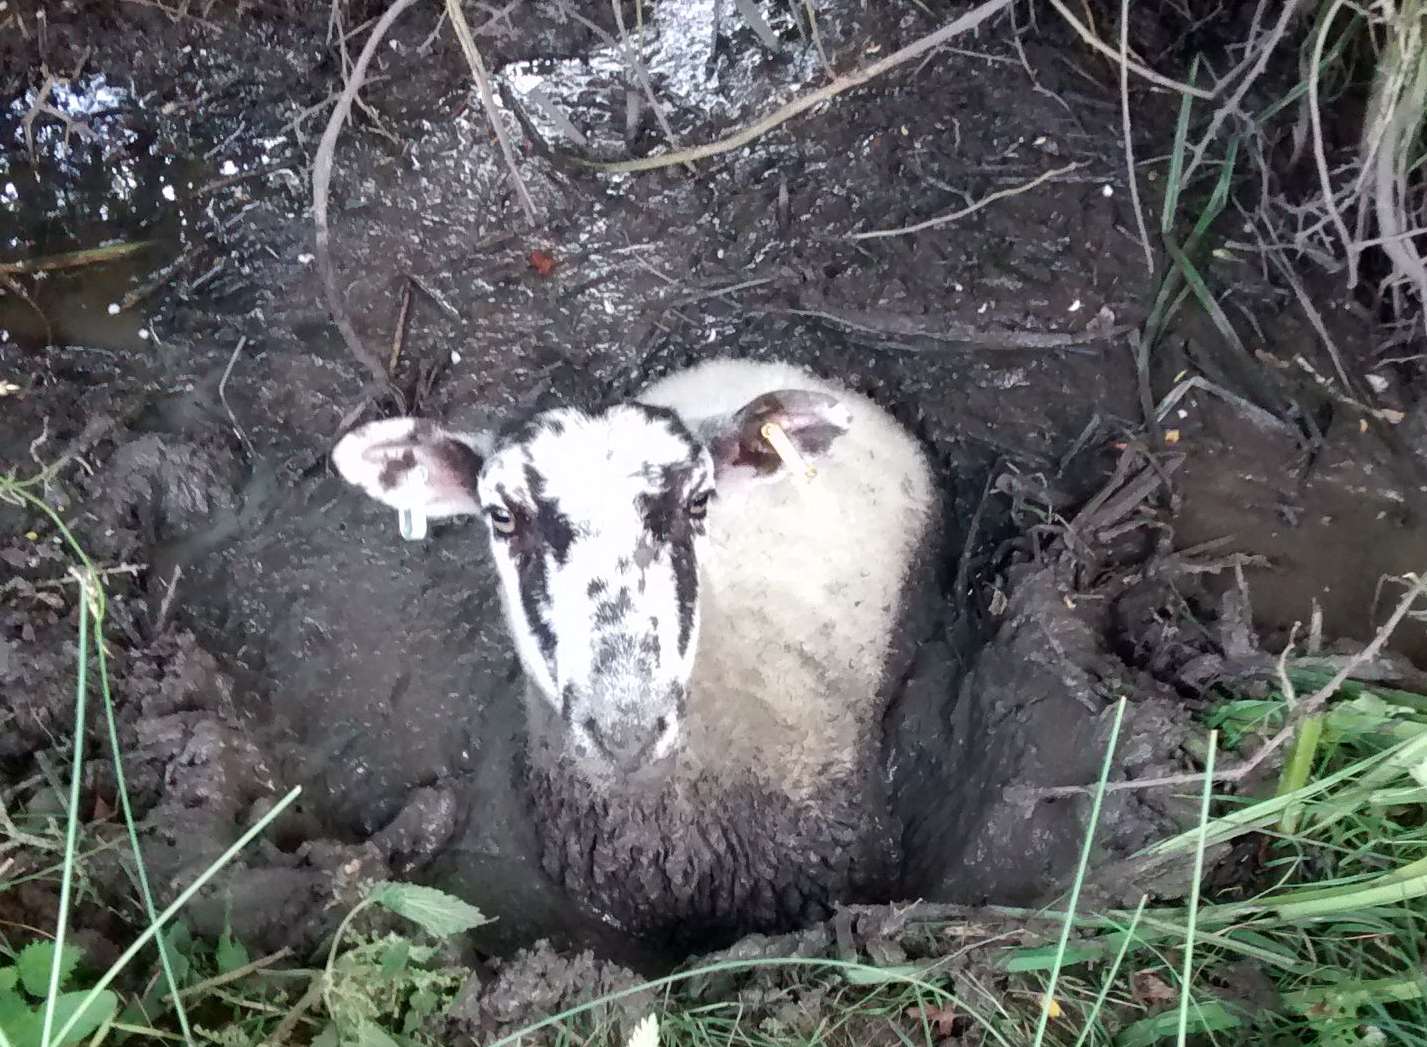 The sheep got stuck in mud up to its shoulders